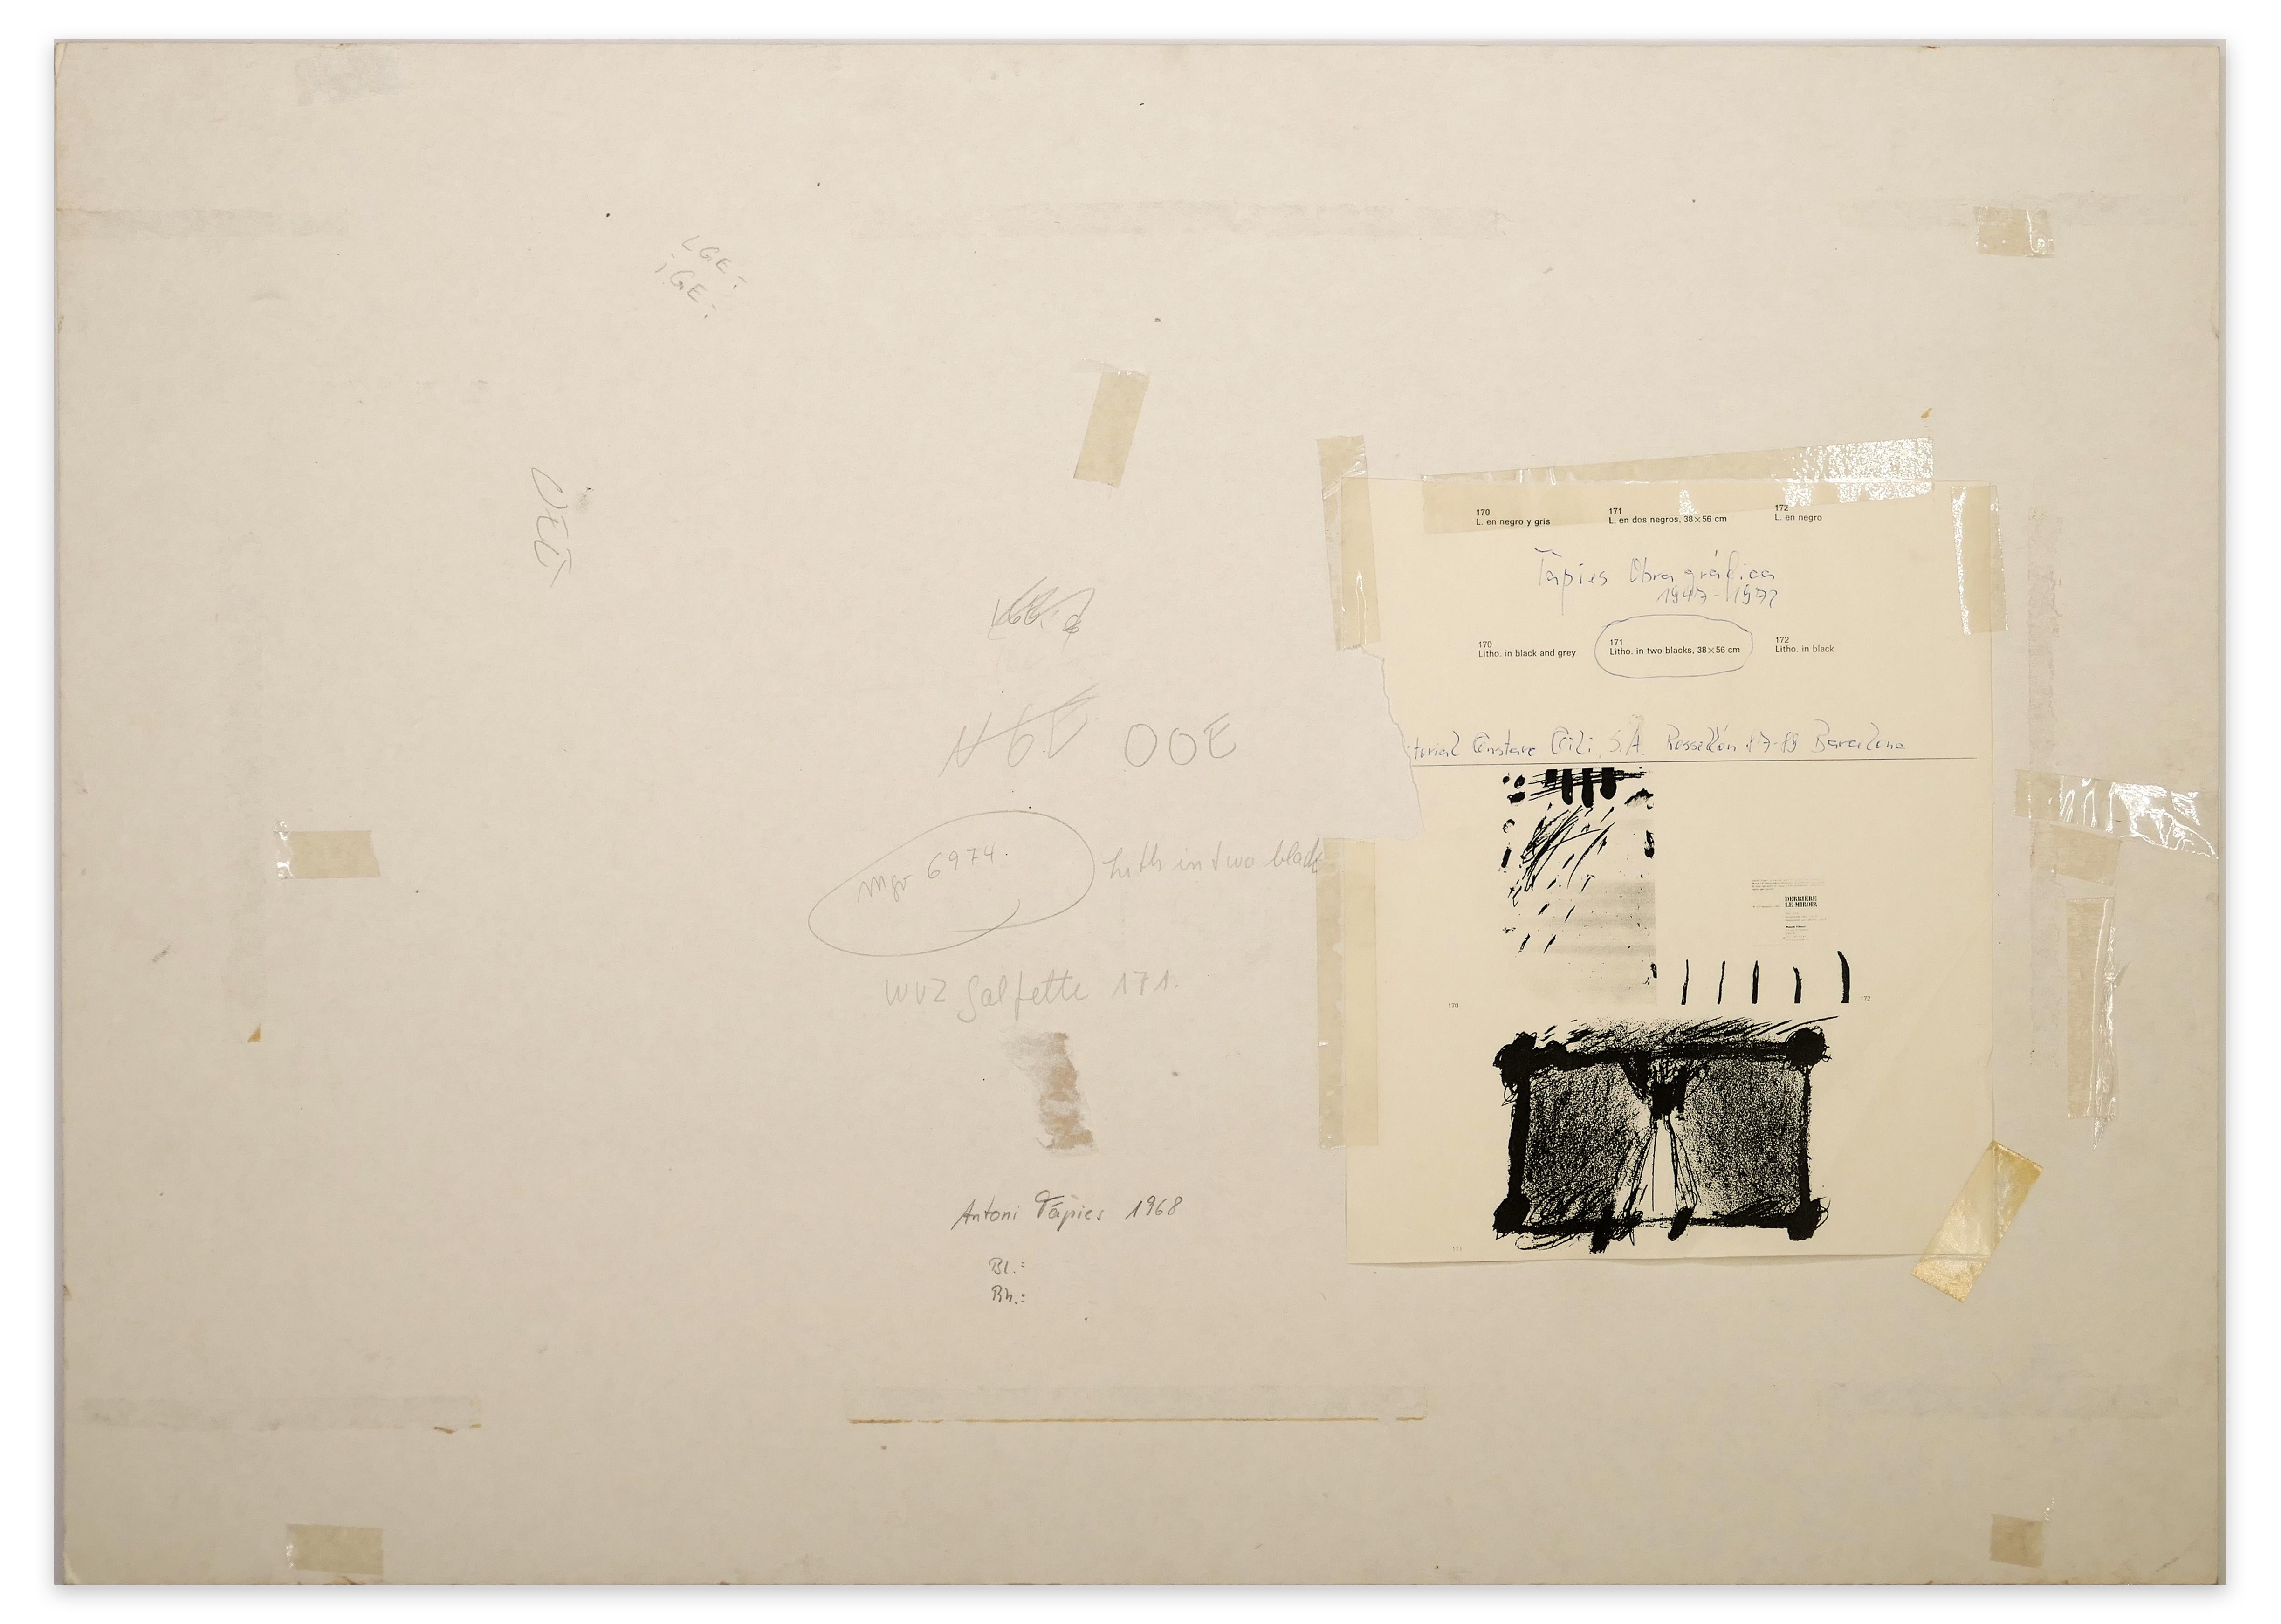 In Two Blacks - Original Lithograph by Antoni Tapies - 1968 - Contemporary Print by Antoni Tàpies